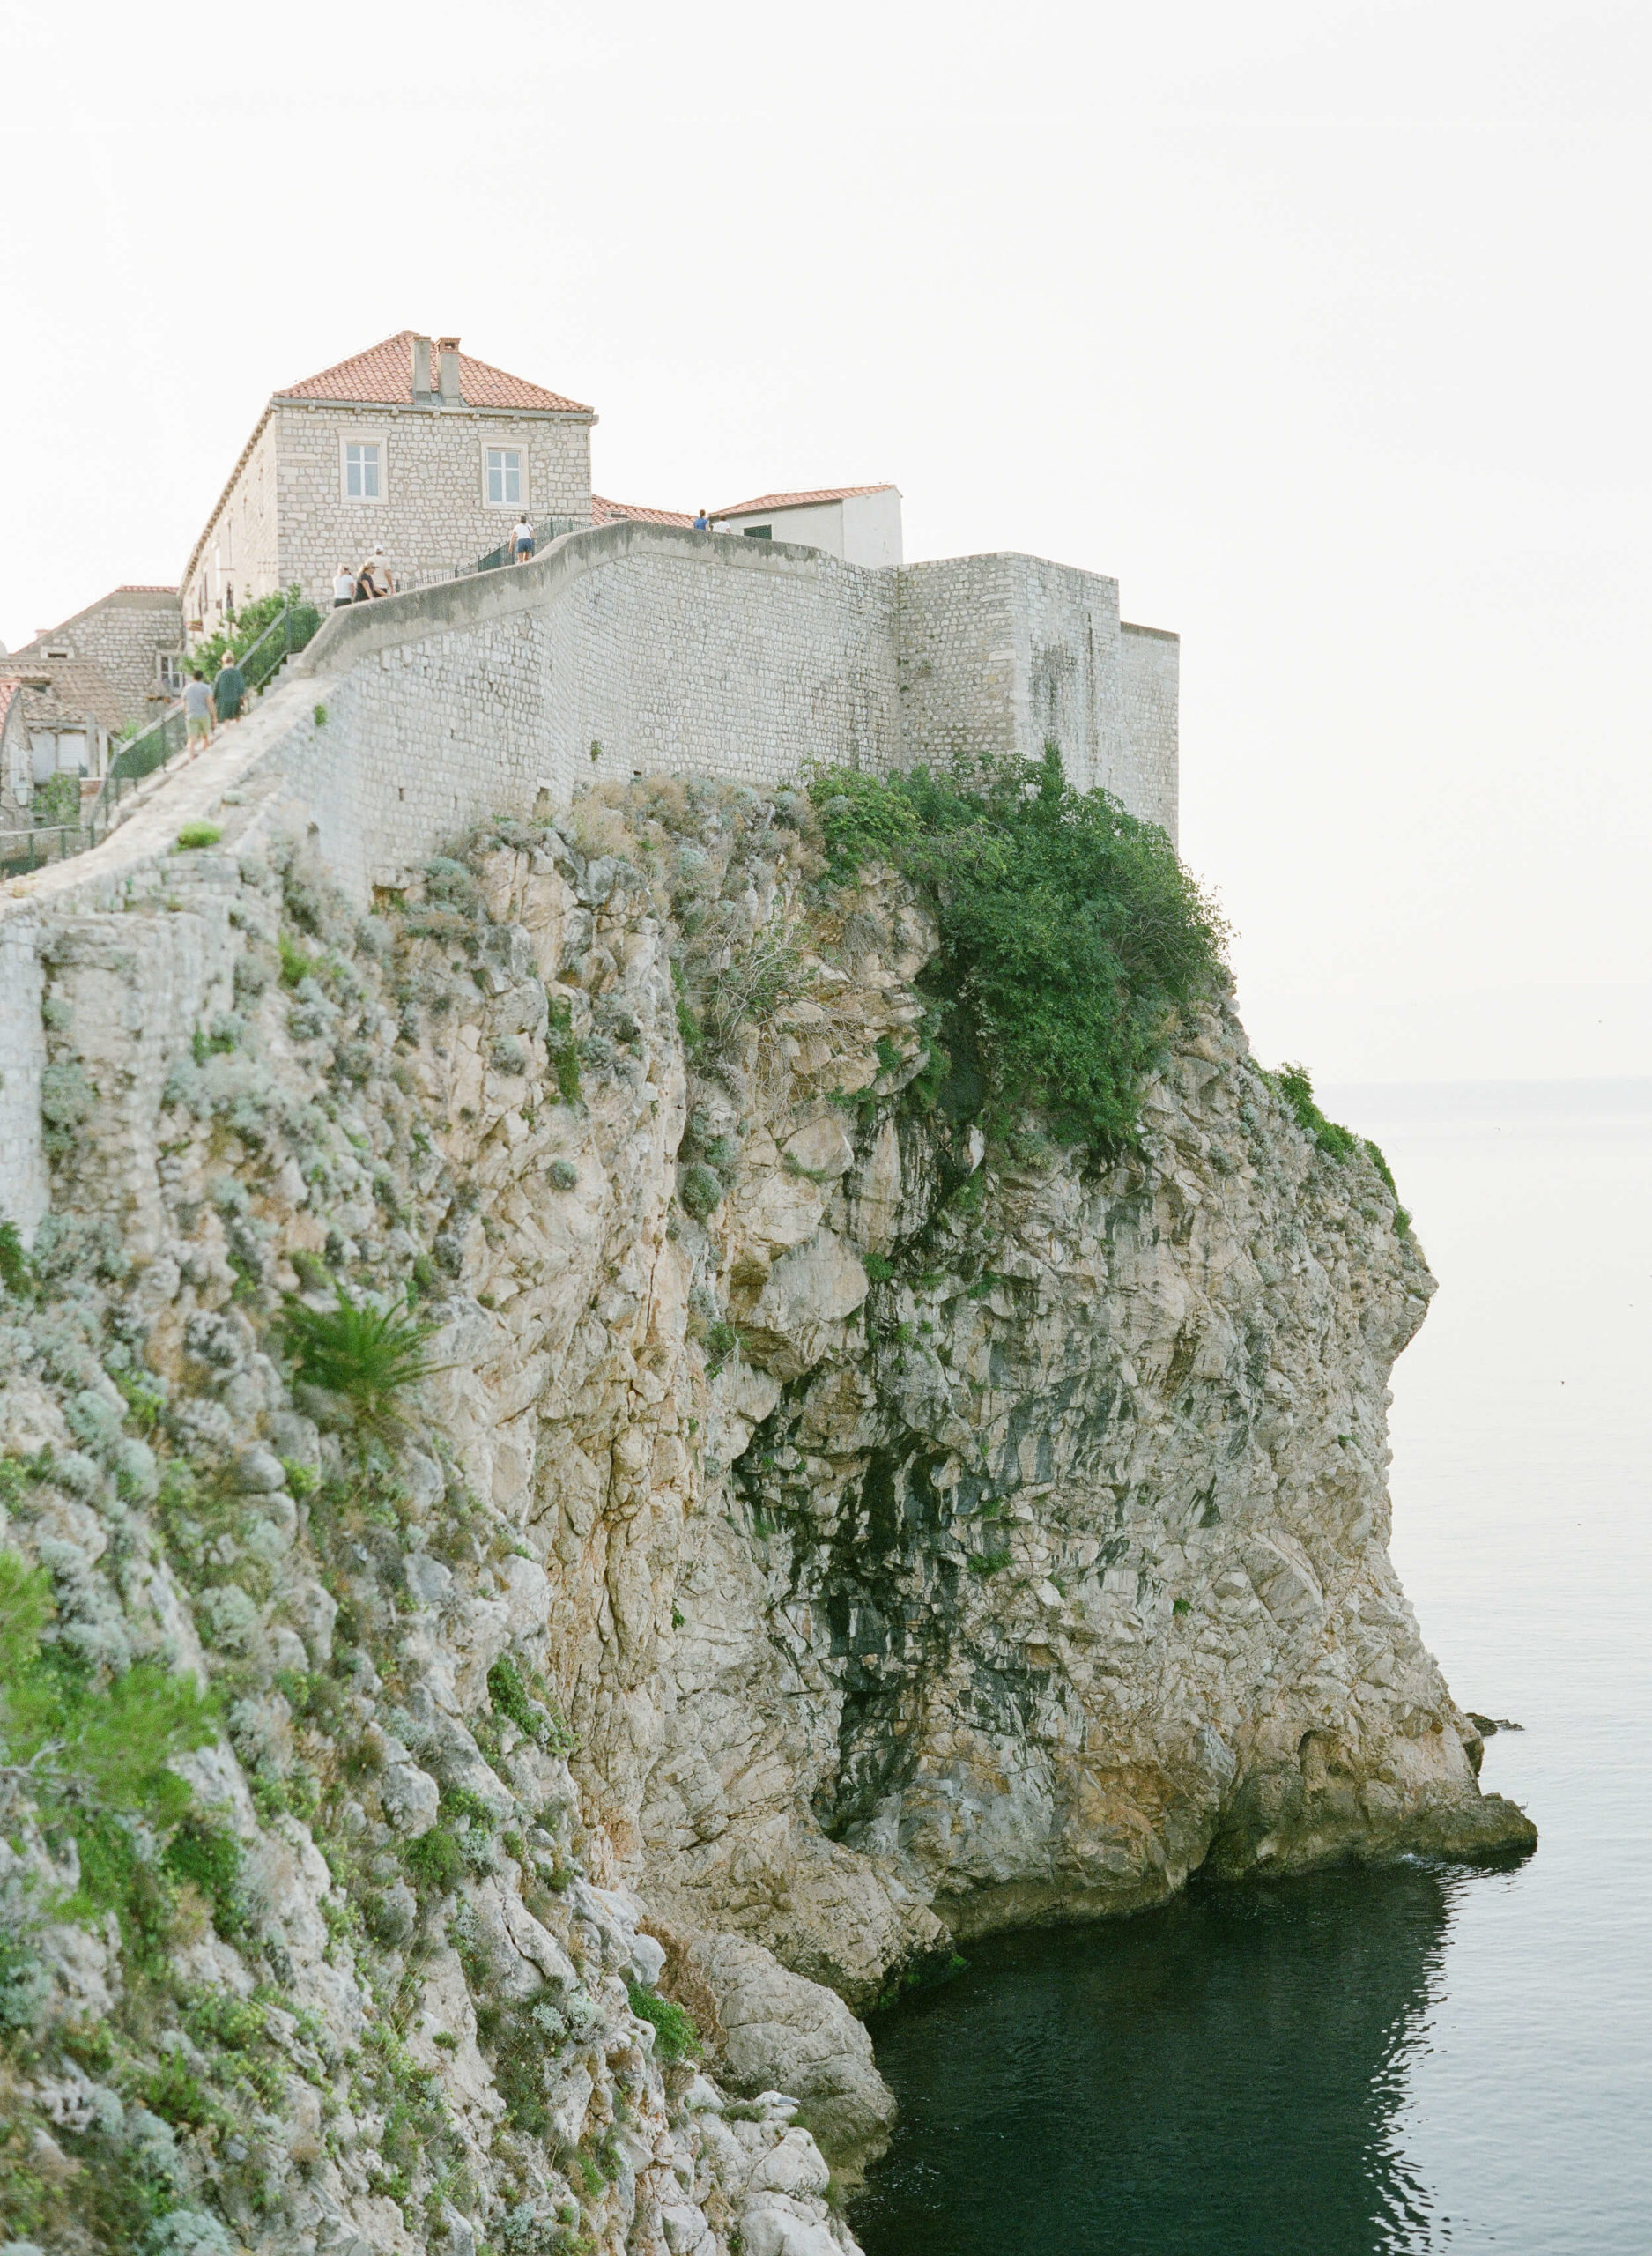 Historical buildings on the edge of a cliff; Dubrovnik, Croatia